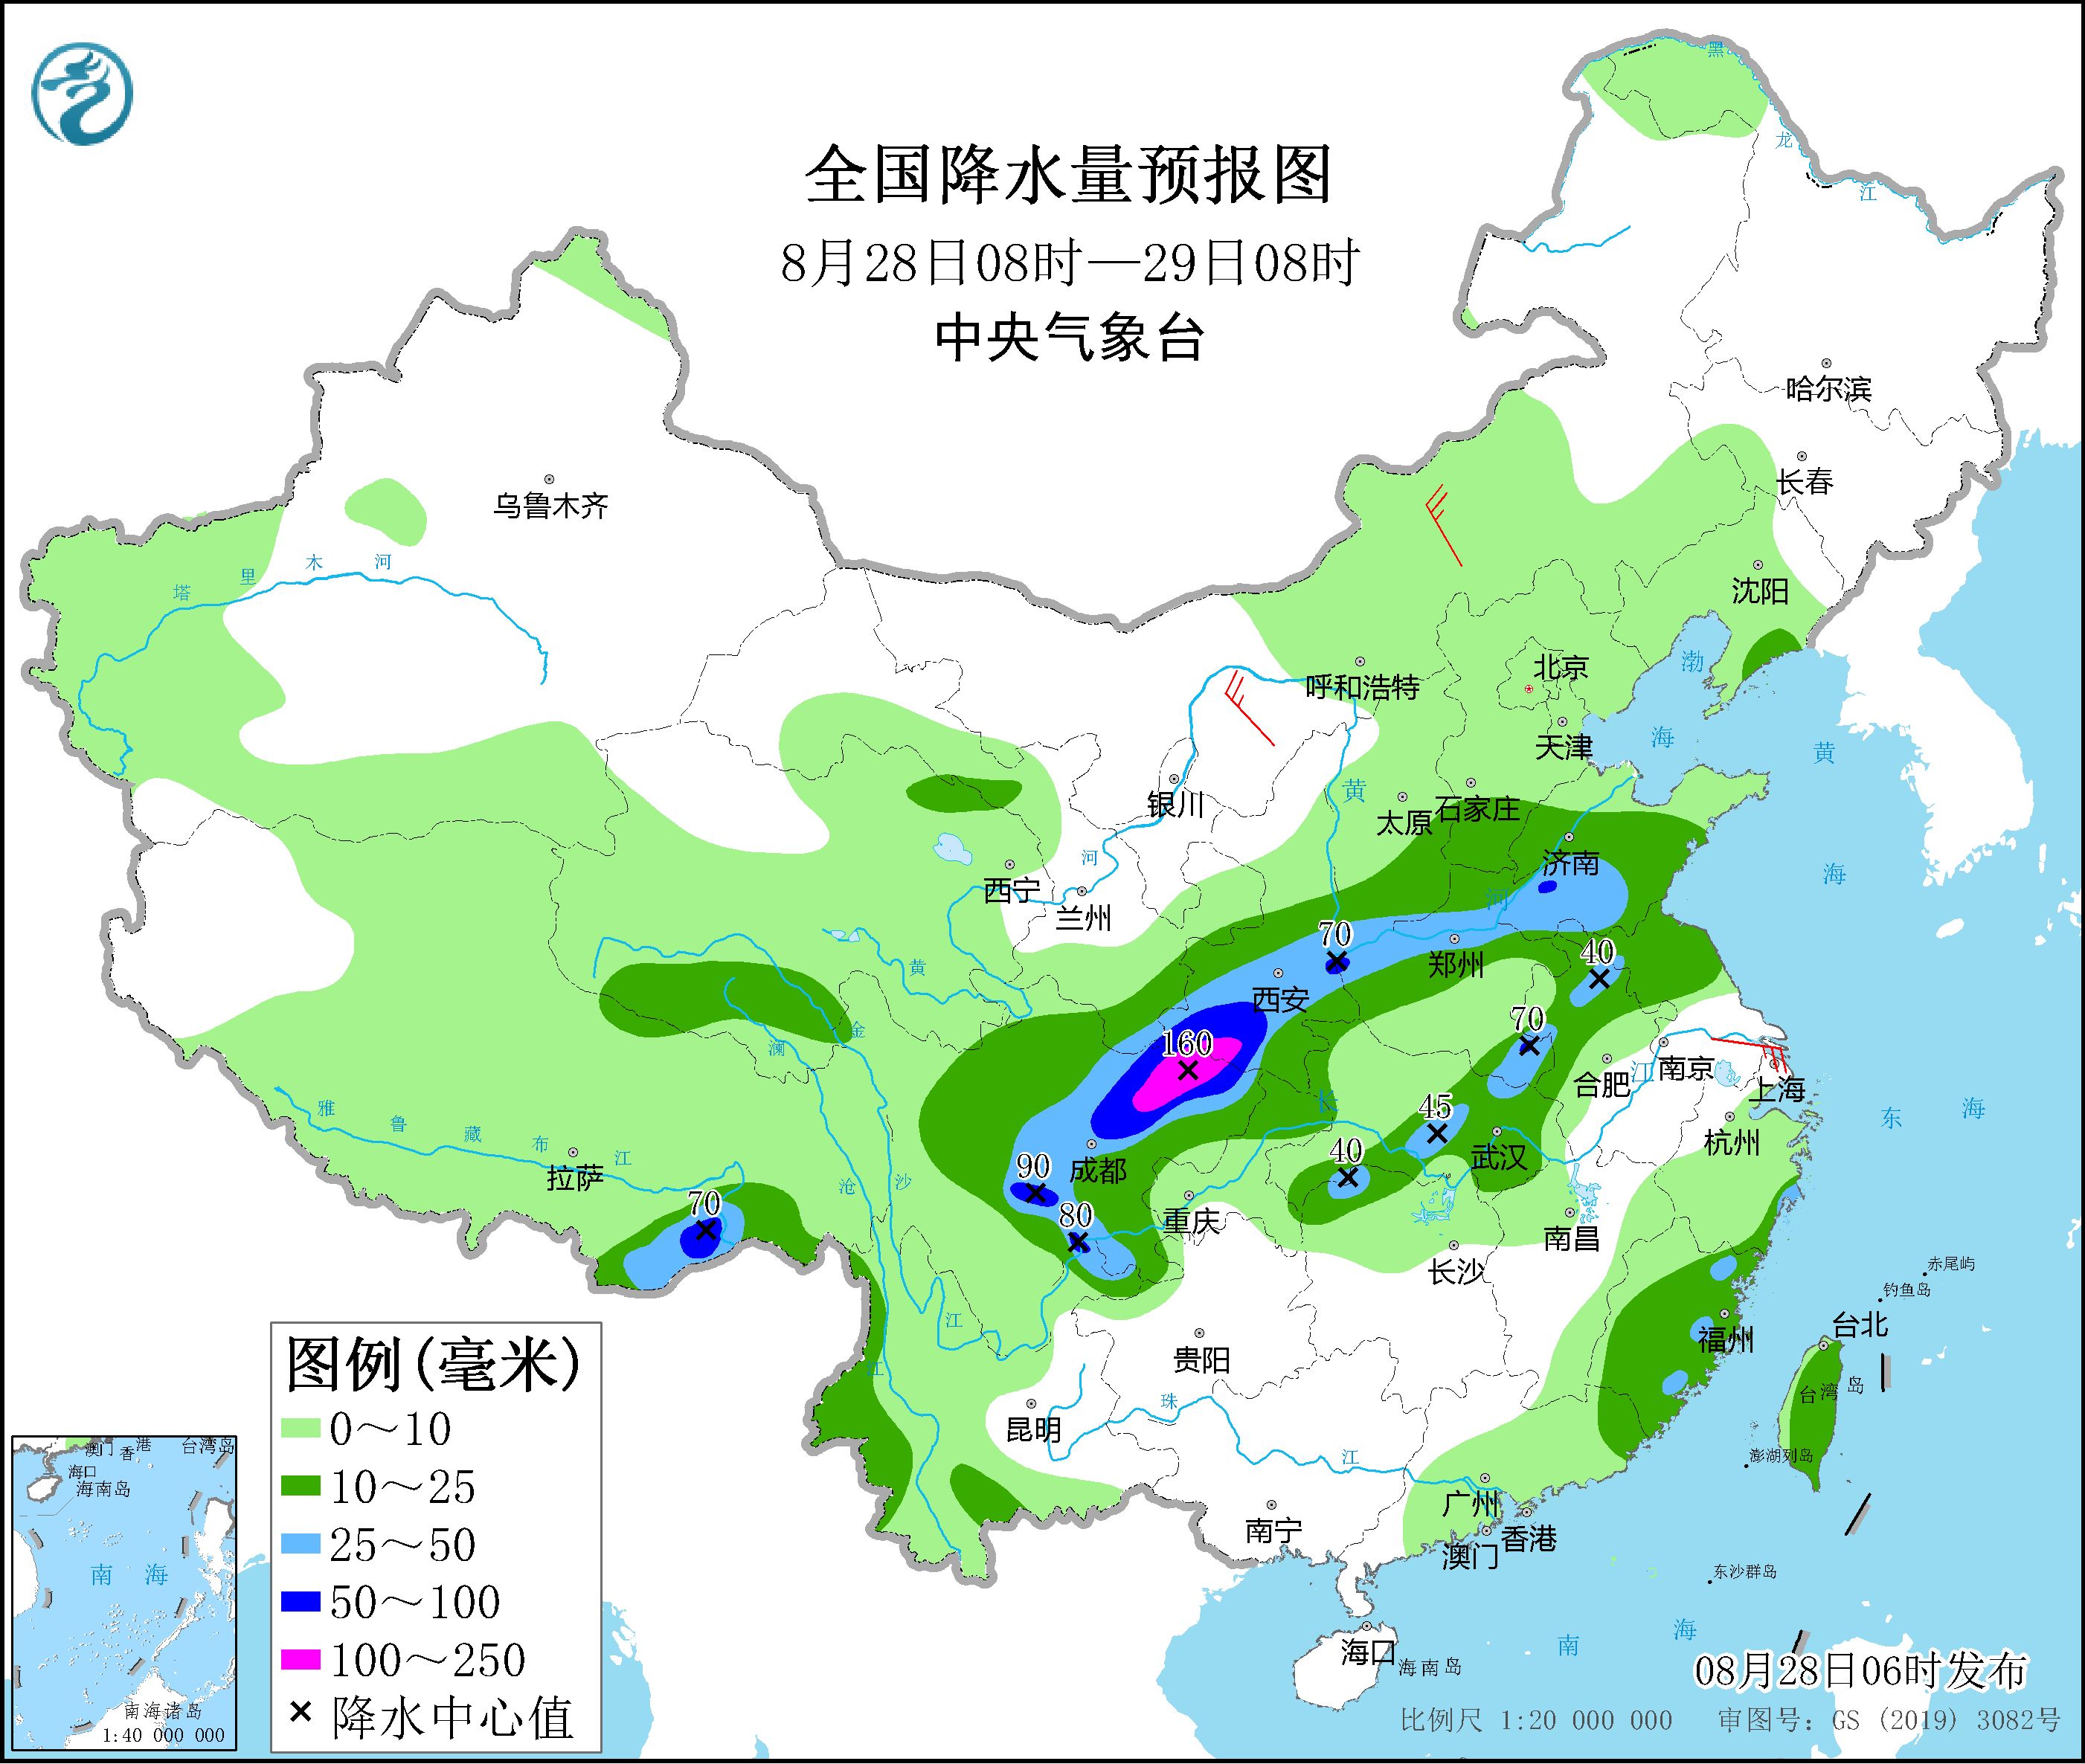 Sichuan Basin, Shaanxi and other places have strong rainfall, Chongqing, Hunan, Jiangxi and other places still have high temperatures